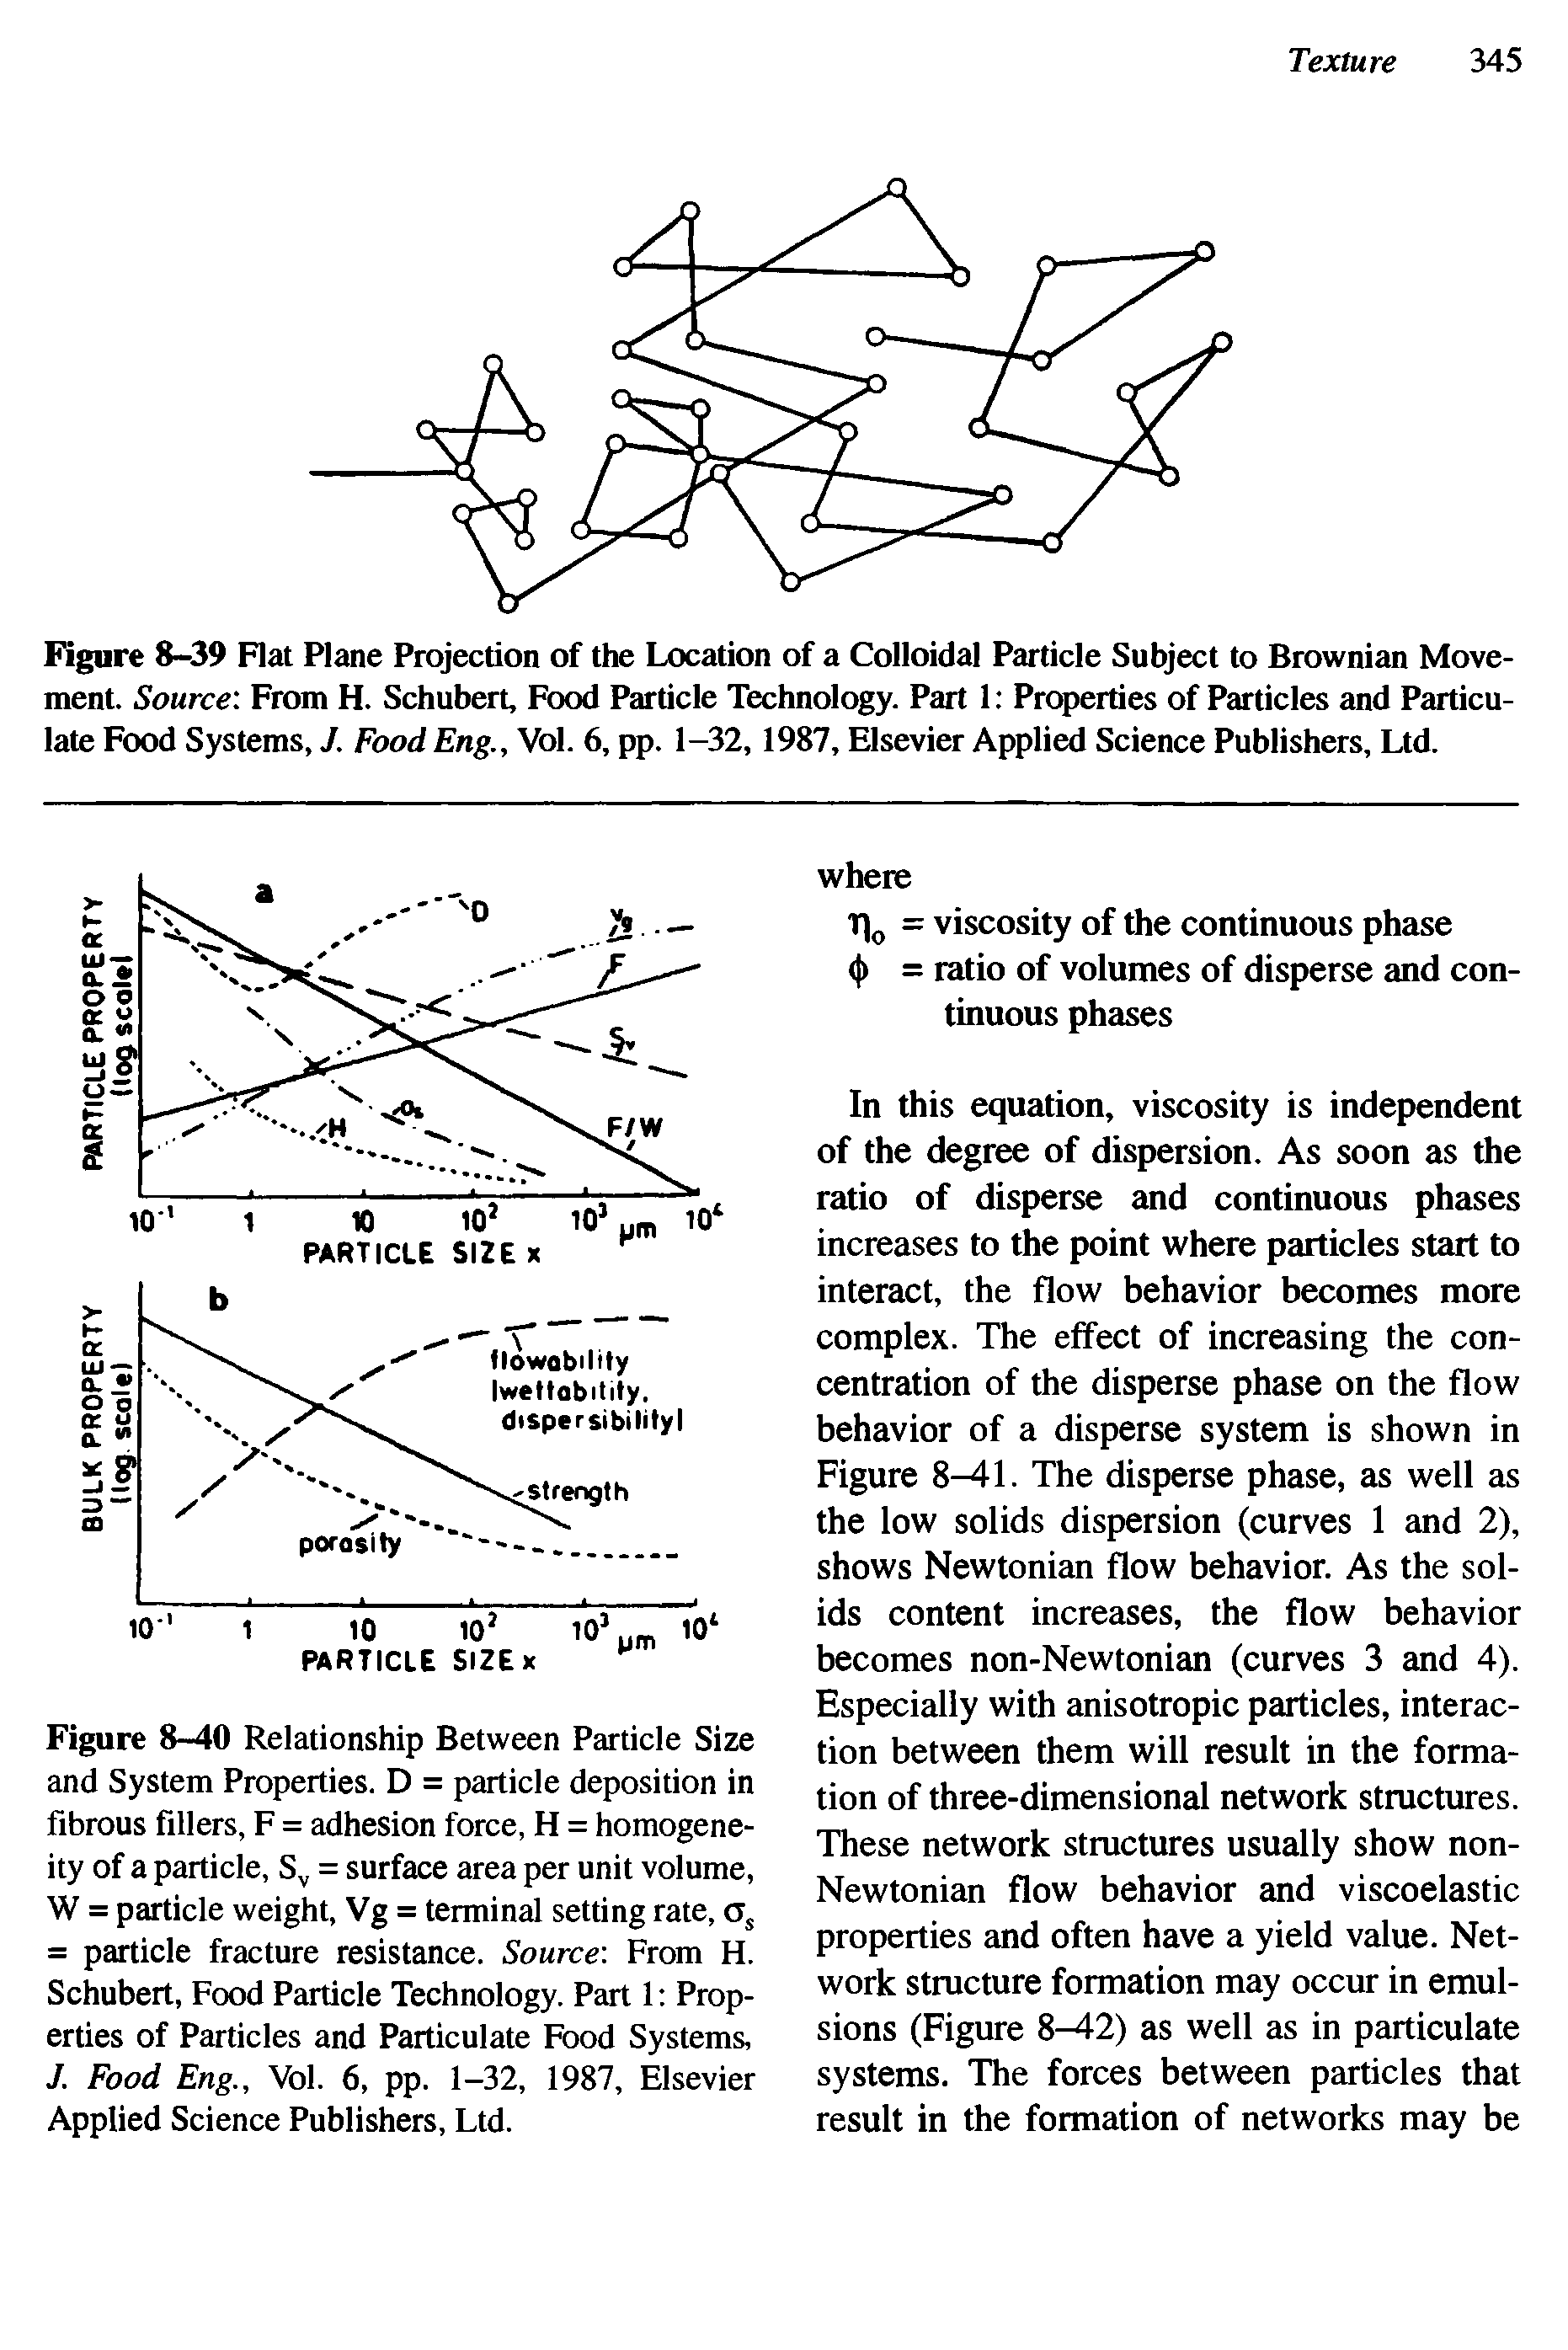 Figure 8-40 Relationship Between Particle Size and System Properties. D = particle deposition in fibrous fillers, F = adhesion force, H = homogeneity of a particle, Sv = surface area per unit volume, W = particle weight, Vg = terminal setting rate, as = particle fracture resistance. Source From H. Schubert, Food Particle Technology. Part 1 Properties of Particles and Particulate Food Systems, J. Food Eng., Vol. 6, pp. 1-32, 1987, Elsevier Applied Science Publishers, Ltd.